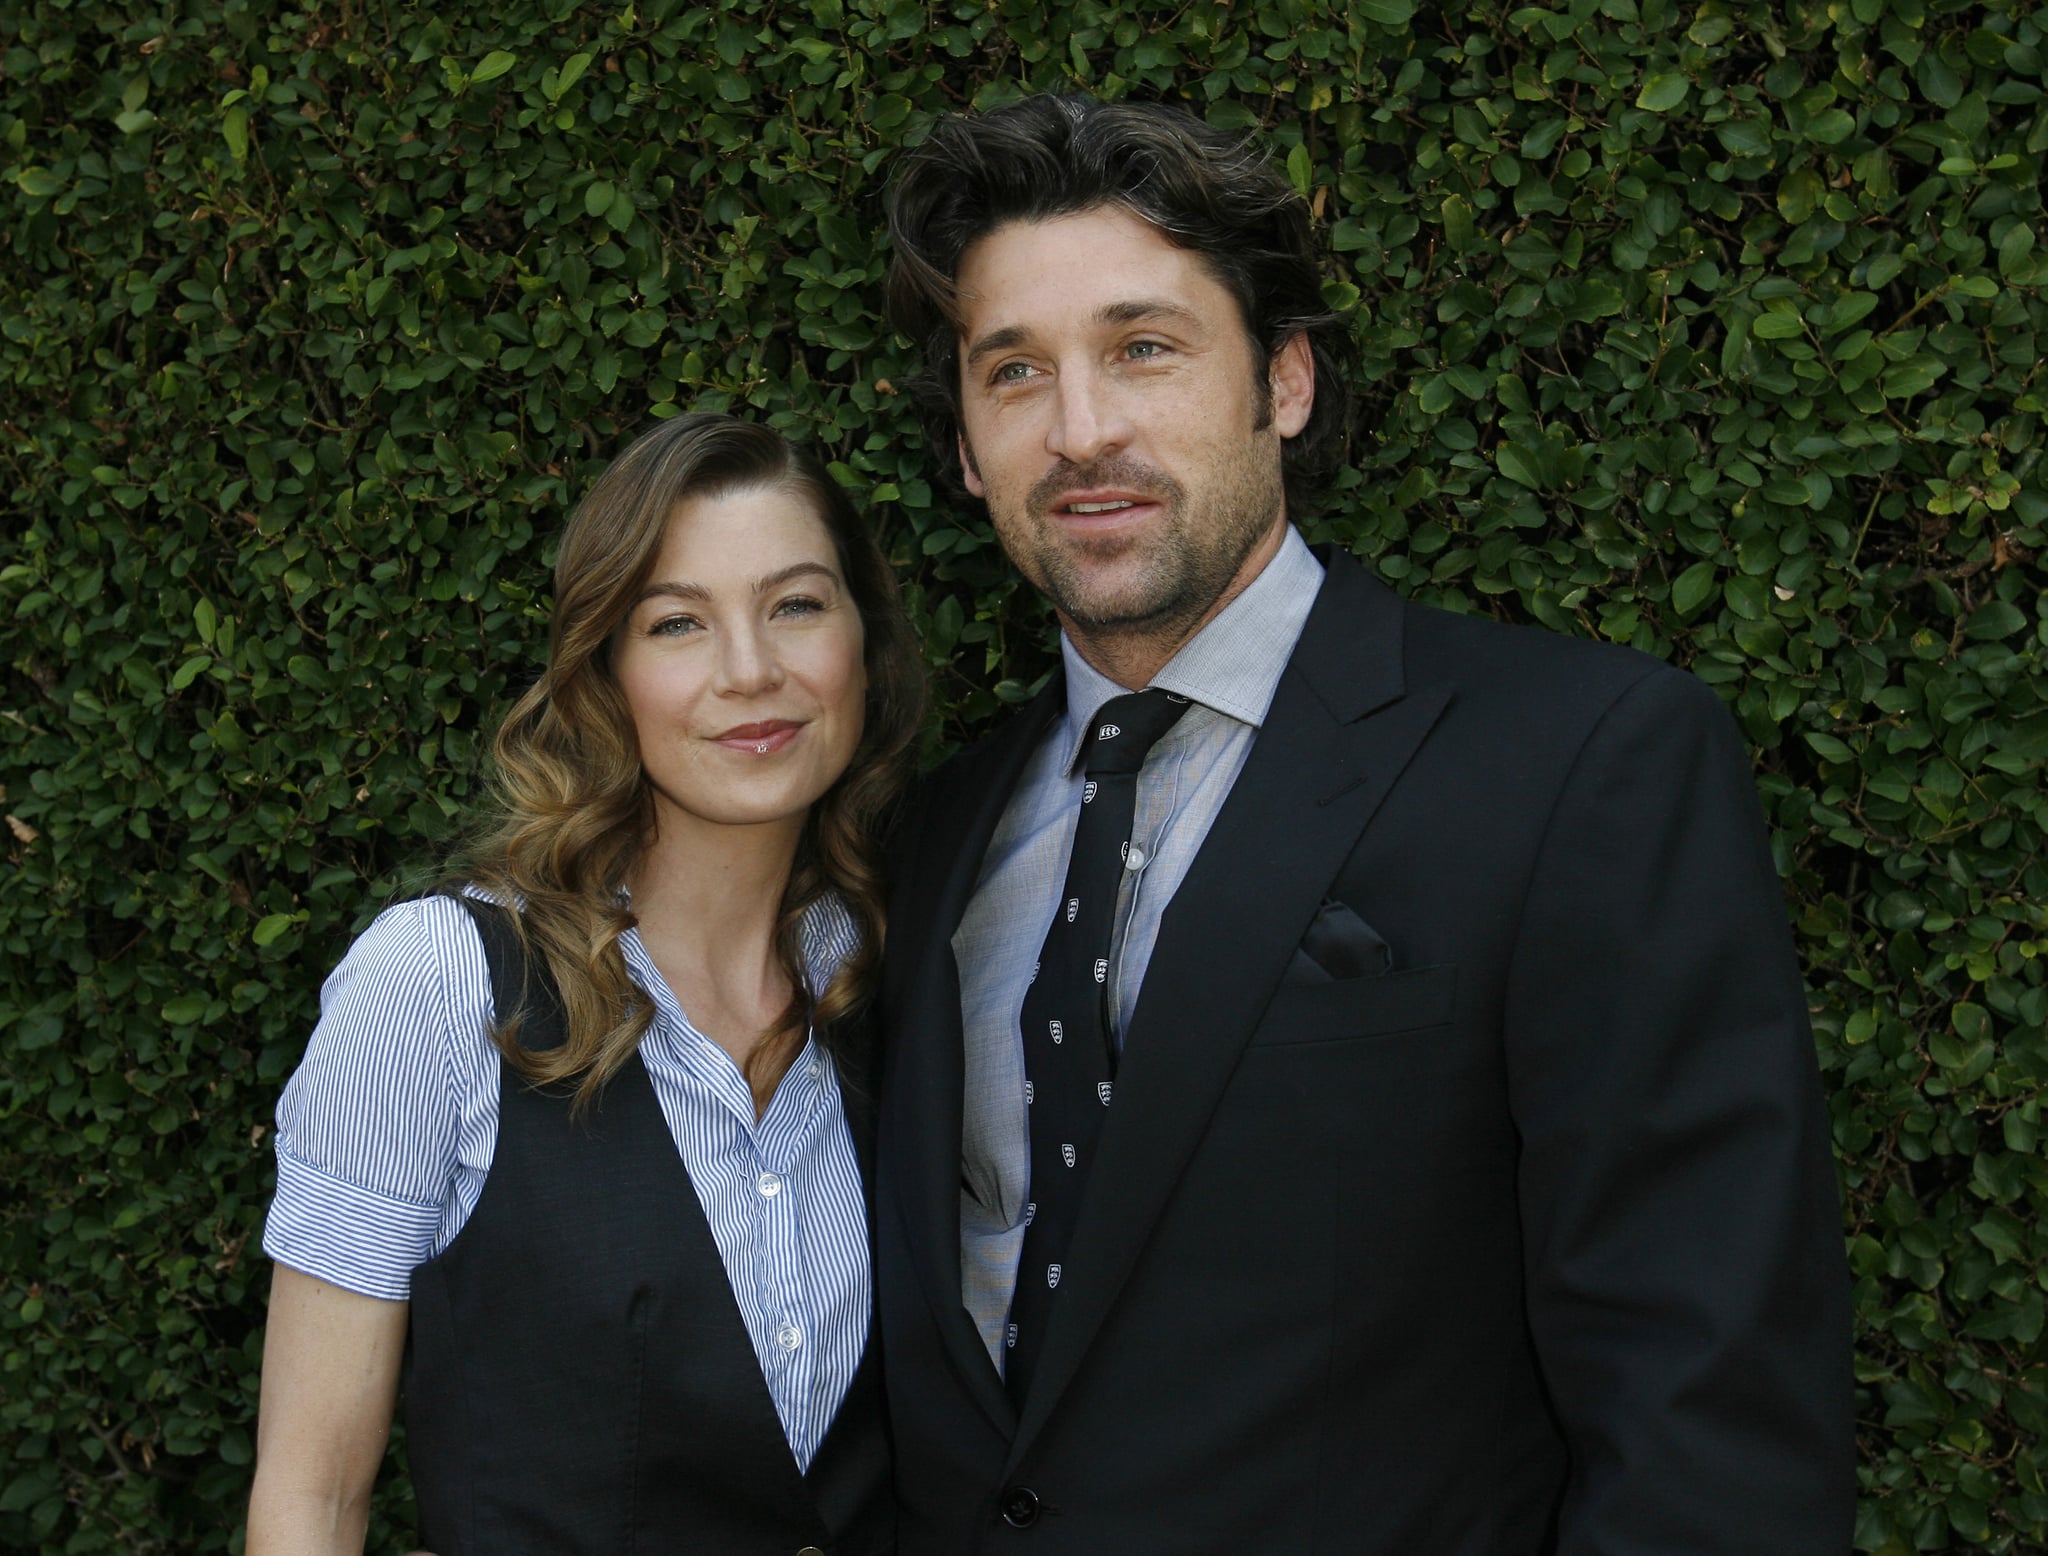 Ellen Pompeo and Patrick Dempsey during The Rape Treatment Centre Annual Brunch Hosted by the Cast of Grey's Anatomy at Private Residence in Beverly Hiils, California, United States. (Photo by Donato Sardella/WireImage)